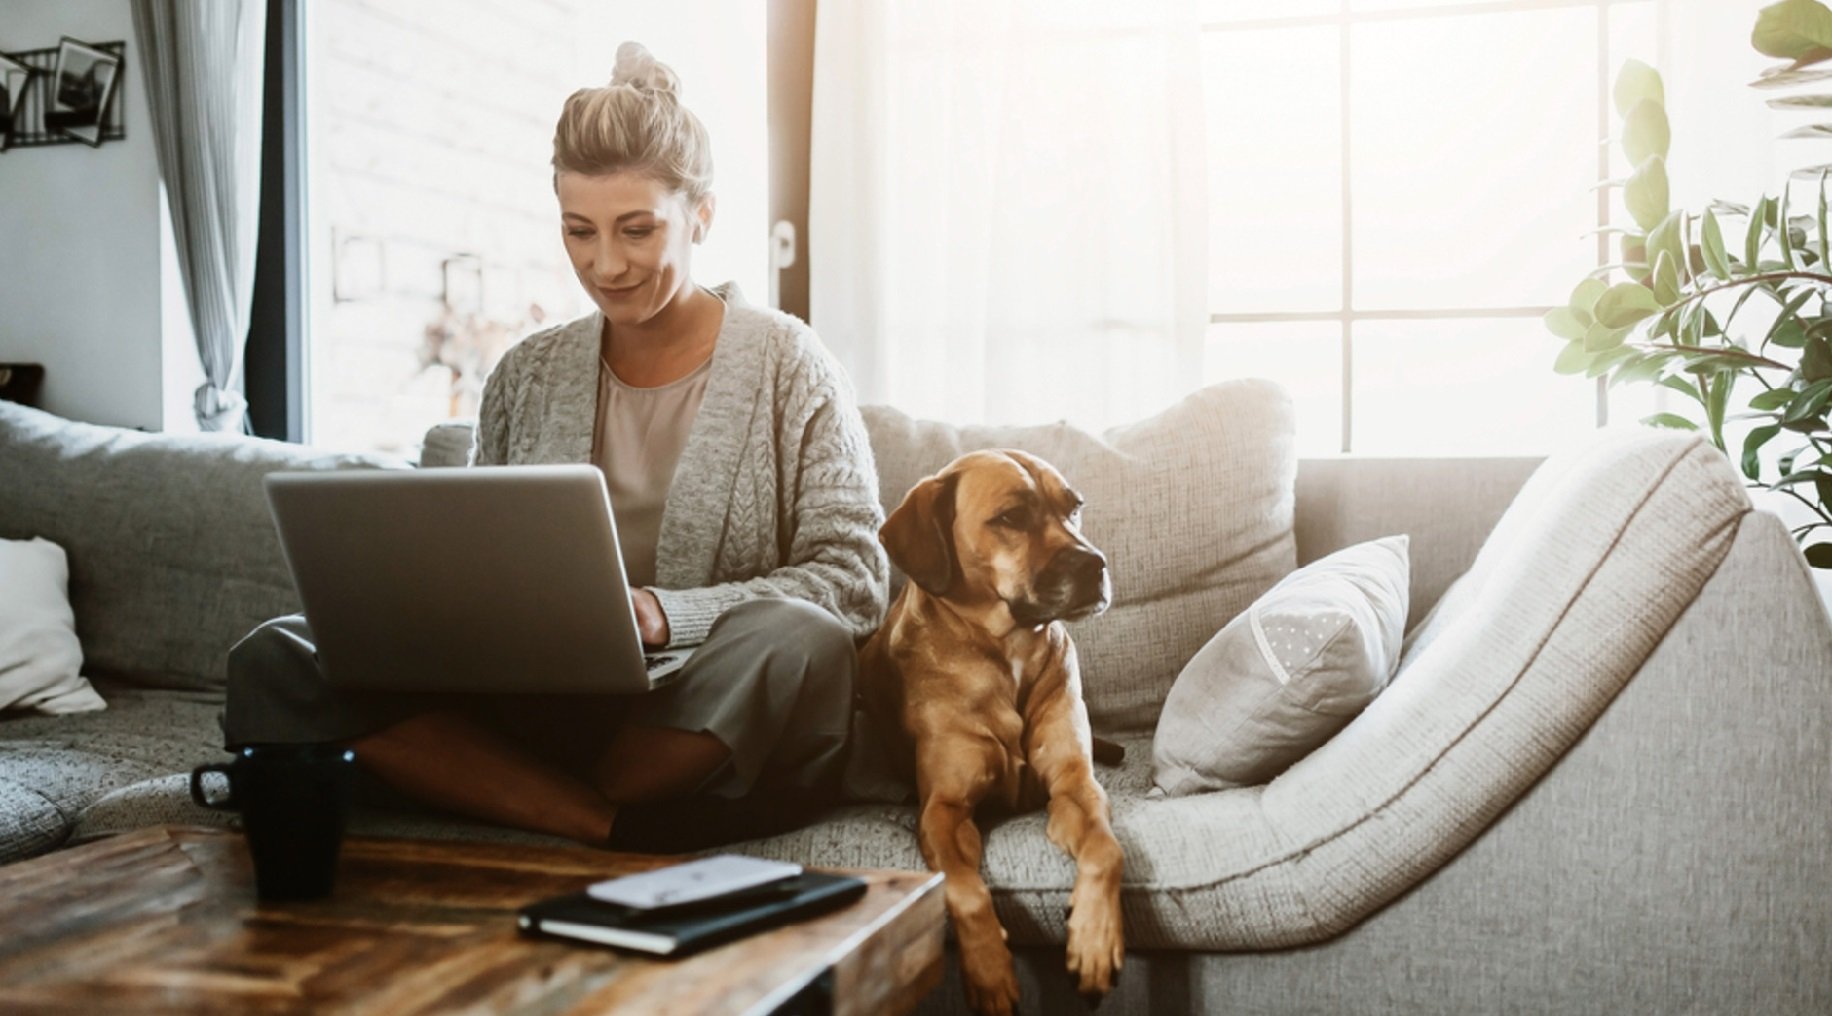 Blonde haired woman completing her side hustle remotely on her sofa with her golden labrador alongside her